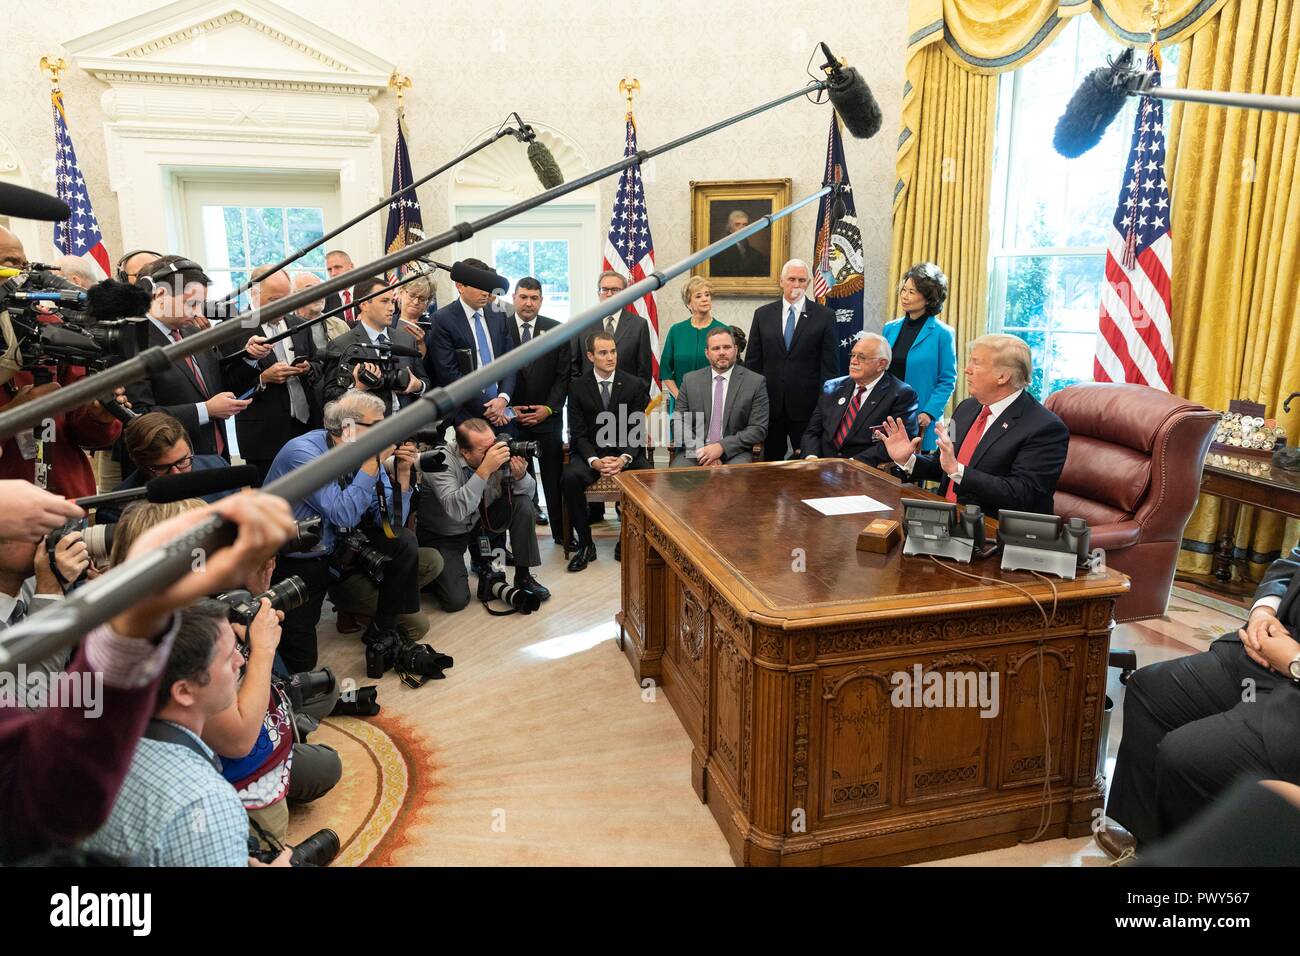 U.S President Donald Trump, joined by Vice President Mike Pence and members of his Cabinet holds an impromptu press conference after the “Cutting the Red Tape and Unleashing Economic Freedom” event in the Oval Office of the White House October 17, 2018 in Washington, DC. Stock Photo